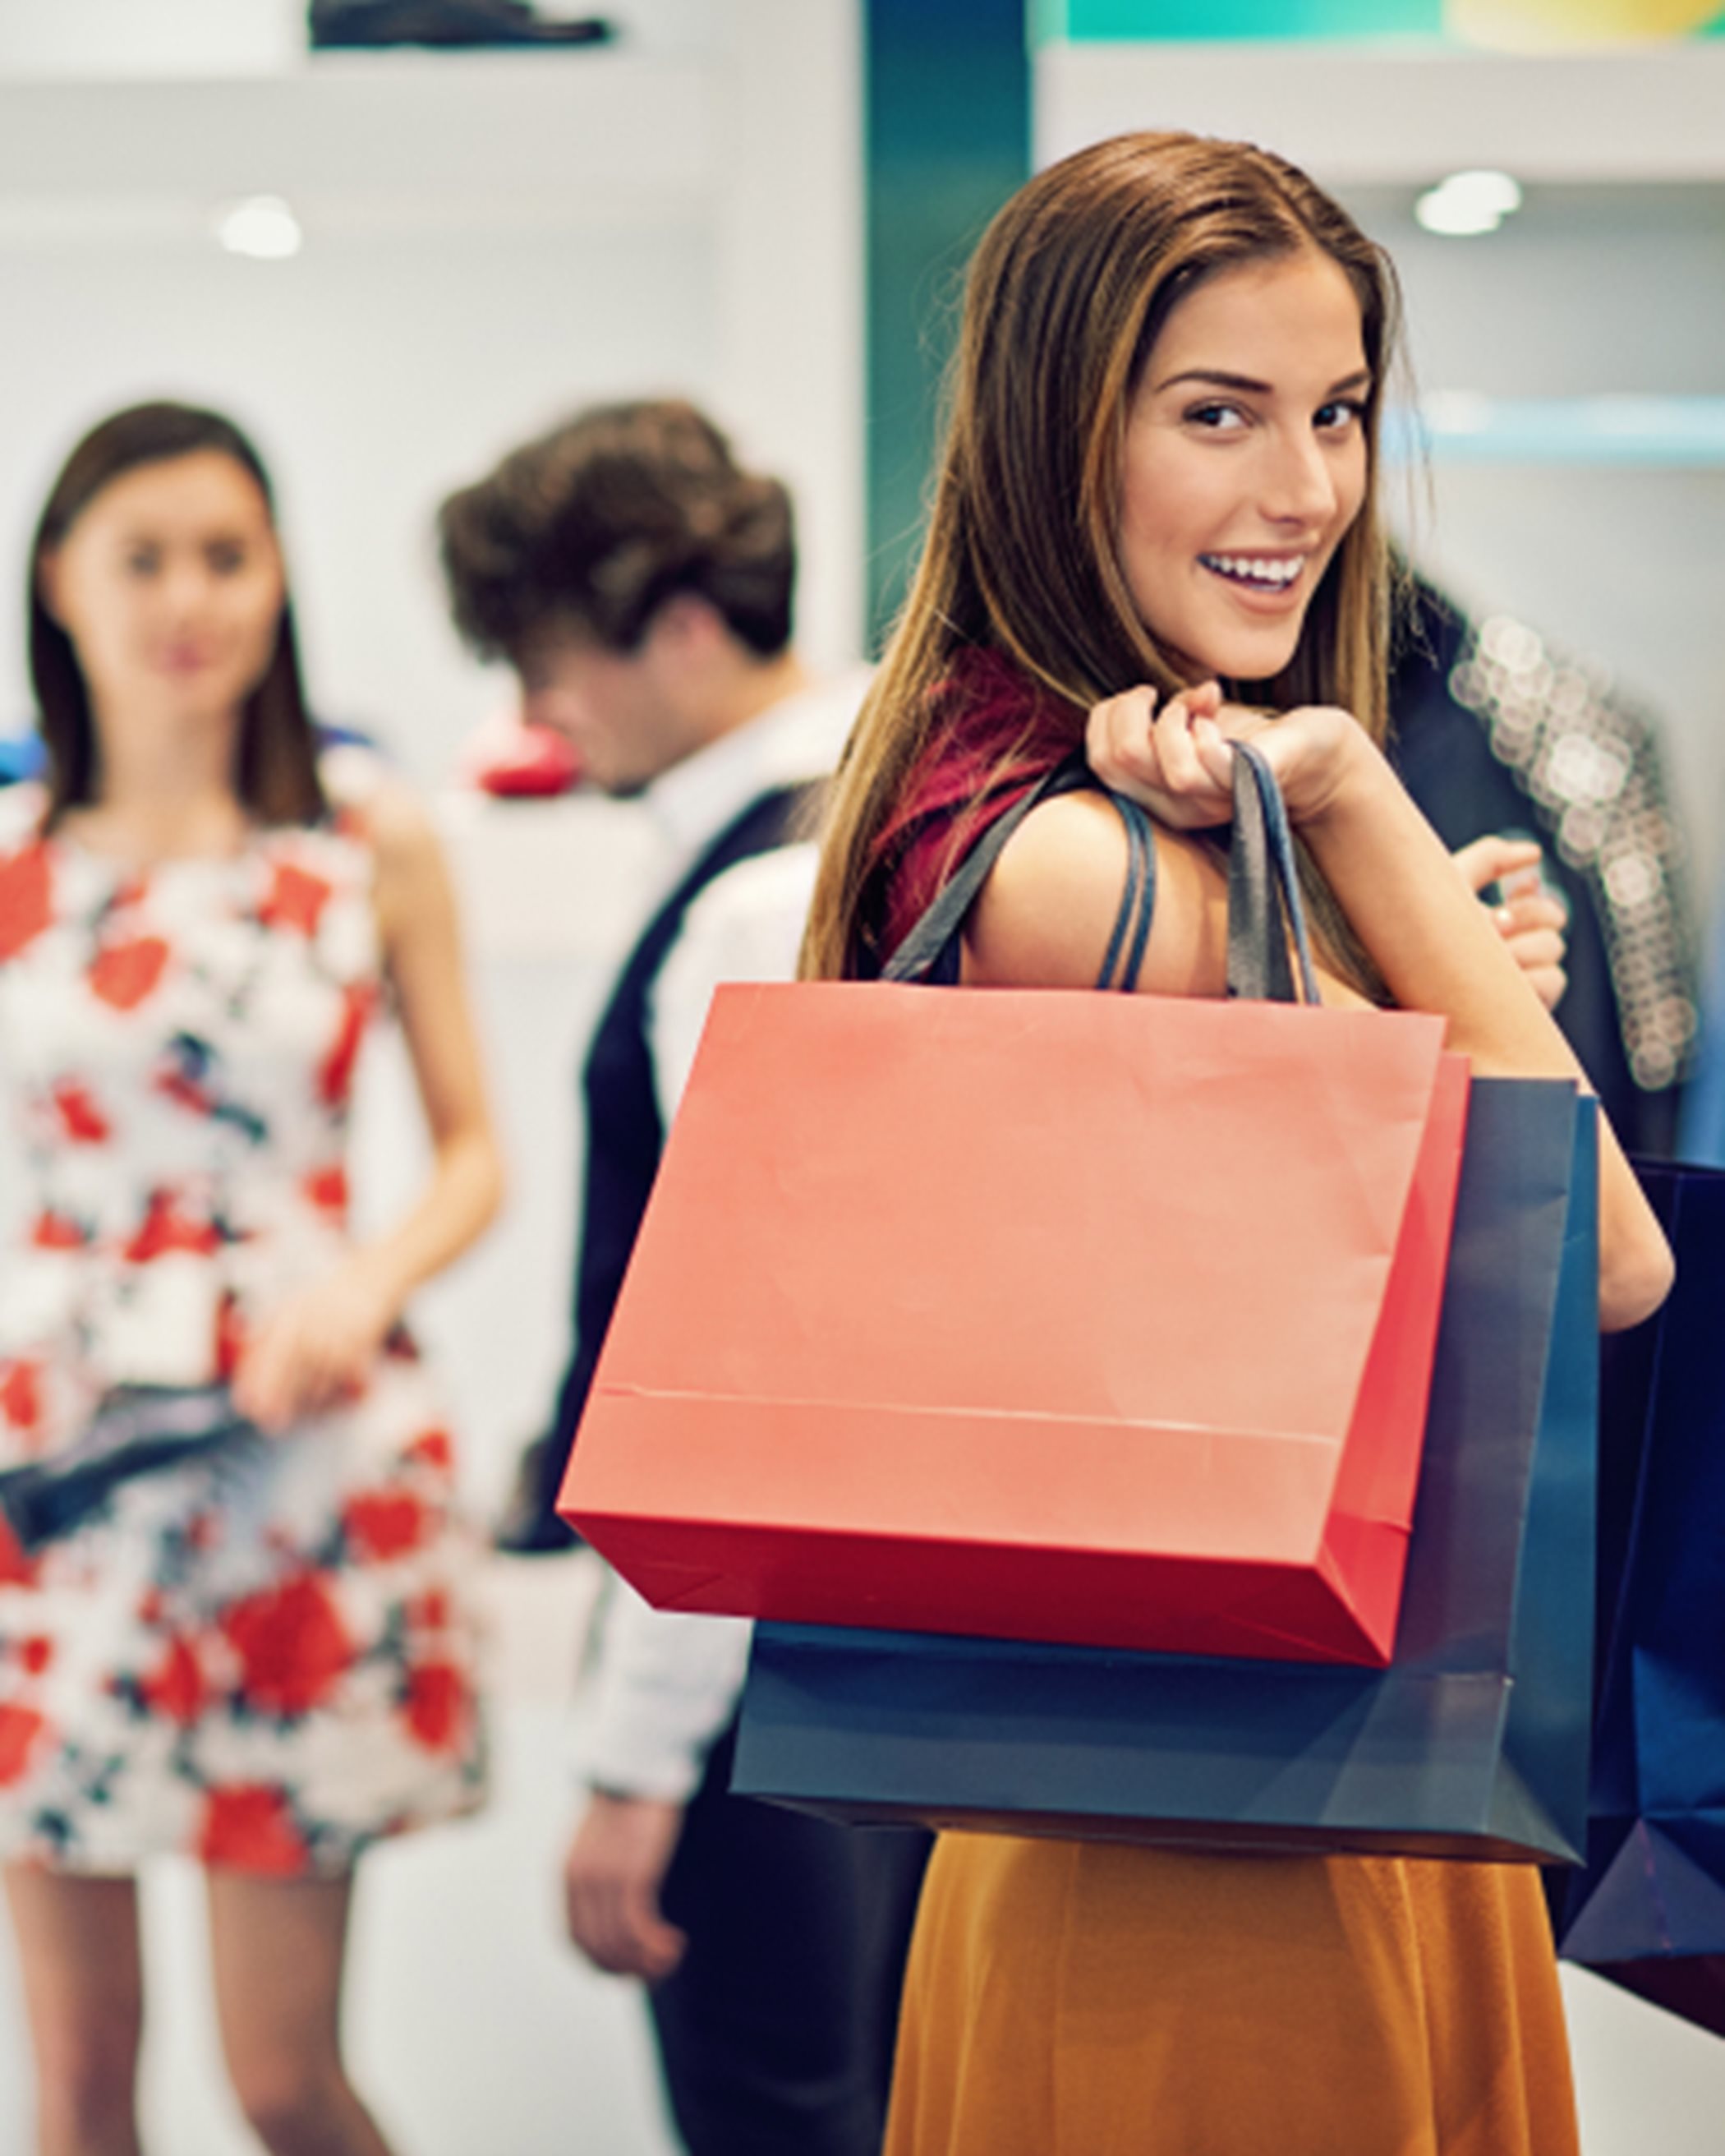 Woman smiling while shopping and holding her bags